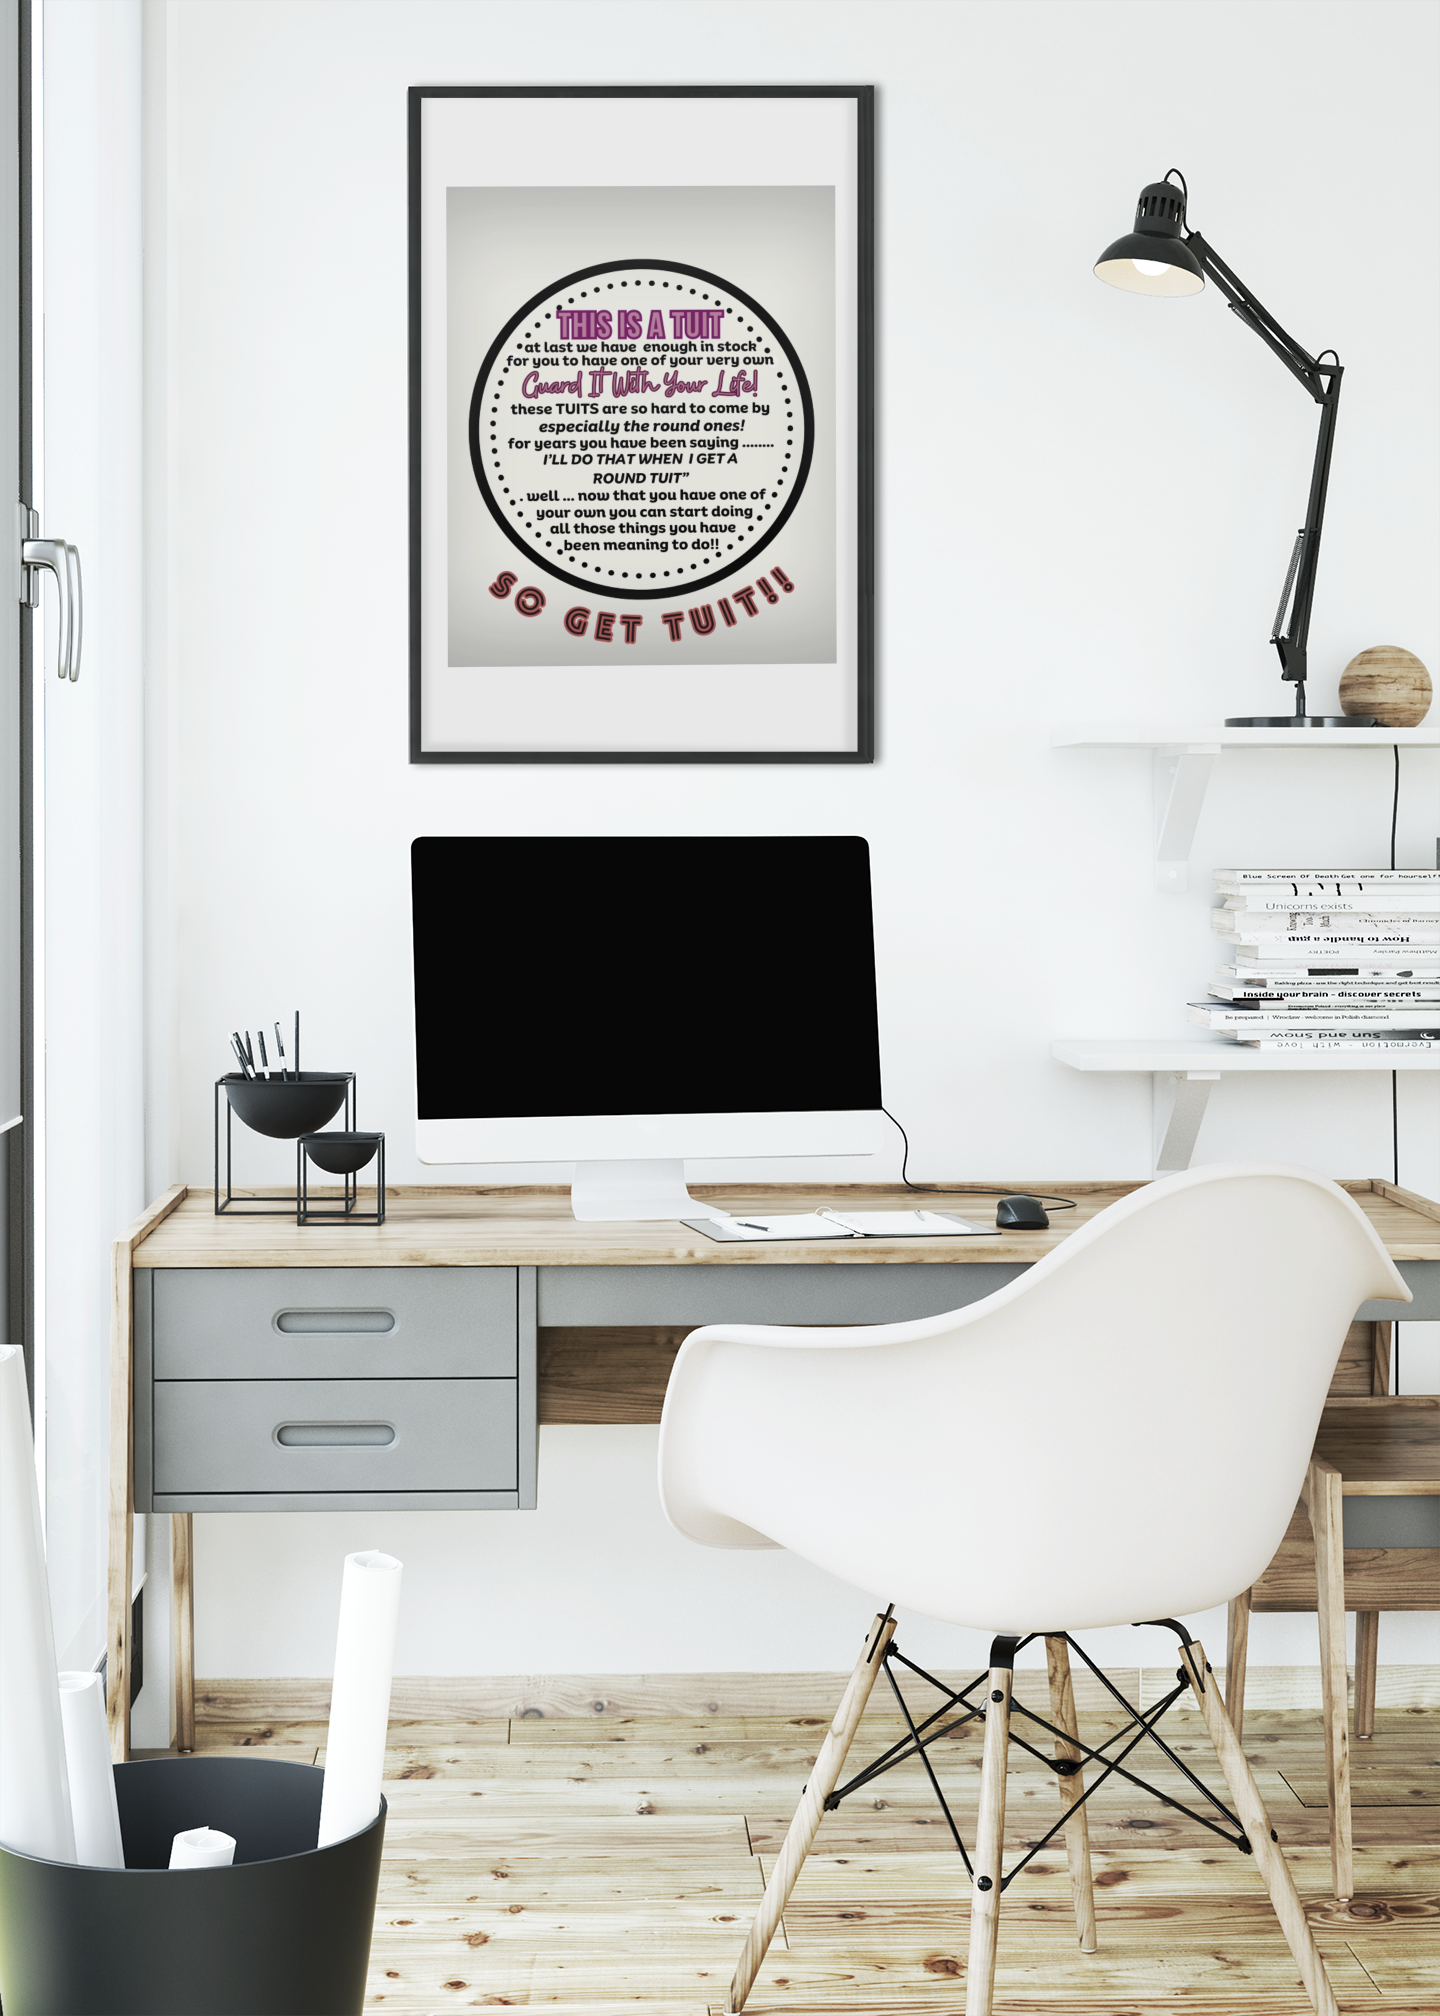 THE ROUND TUIT - QUIRKY UNIQUE WALL ART featuring a positive and humorous affirmation in tones of GREY.